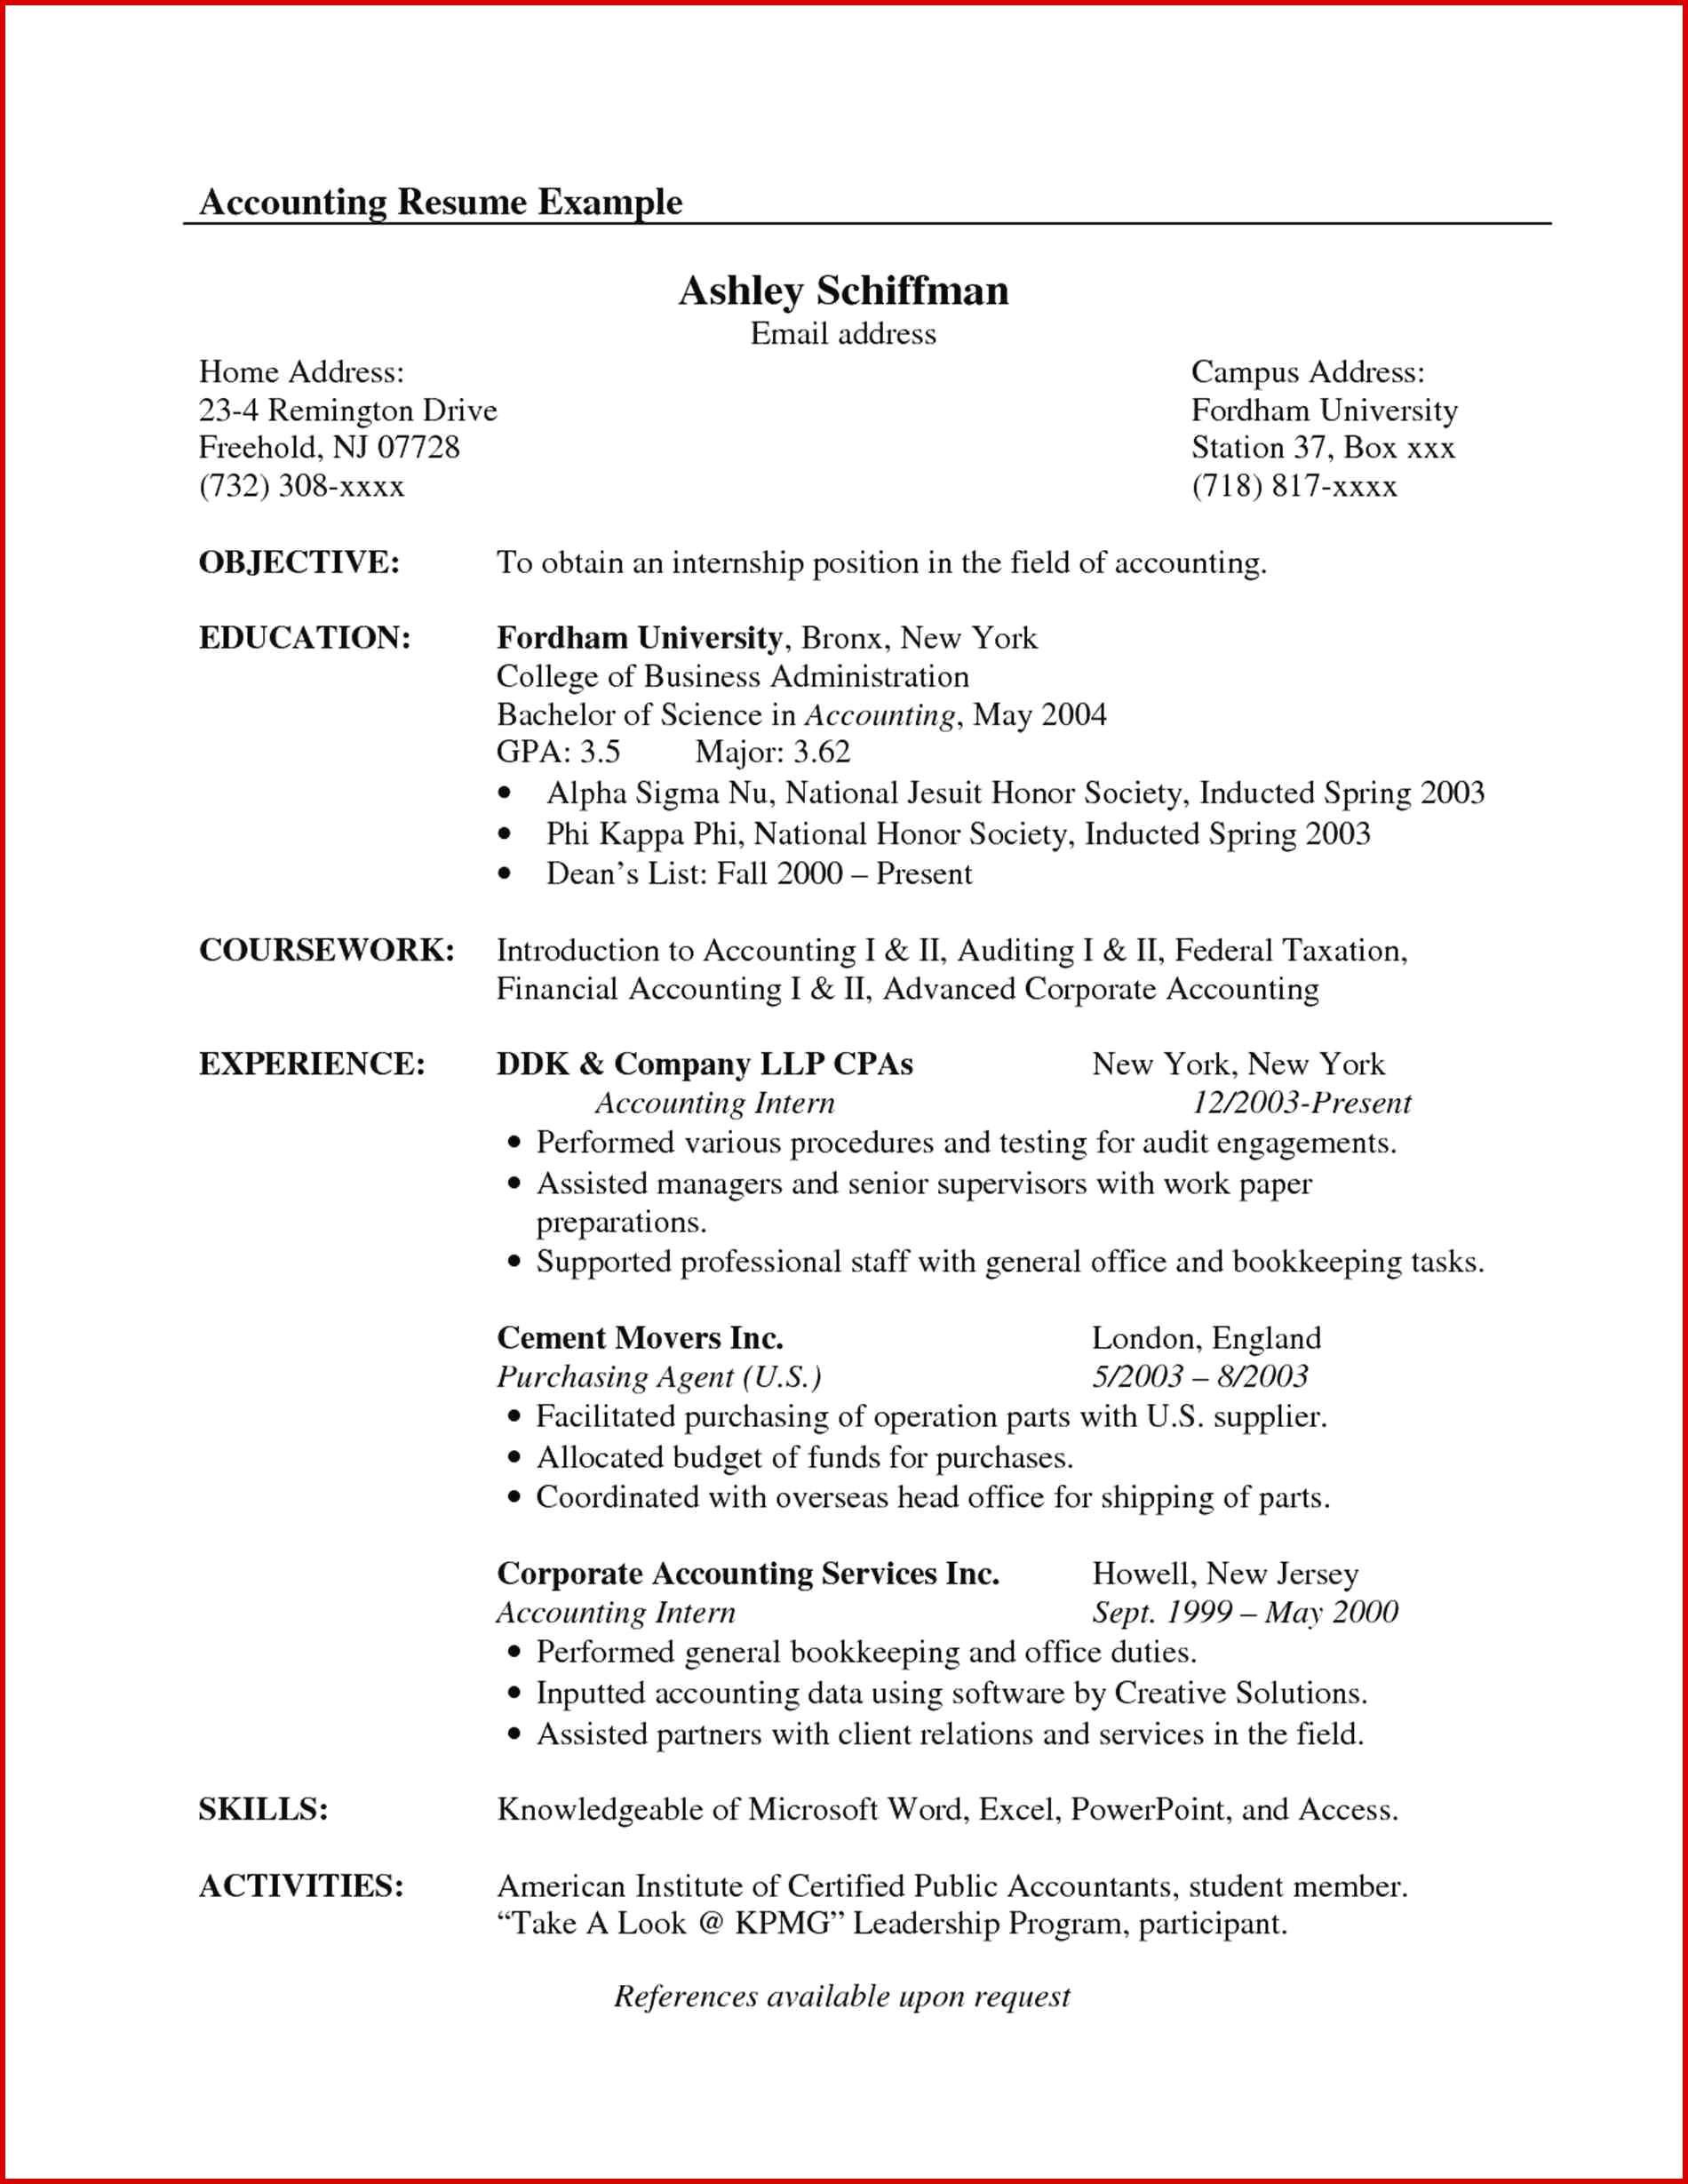 Resume Objective Sample for It Professional Career Objective Sample for Resume – Good Resume Examples